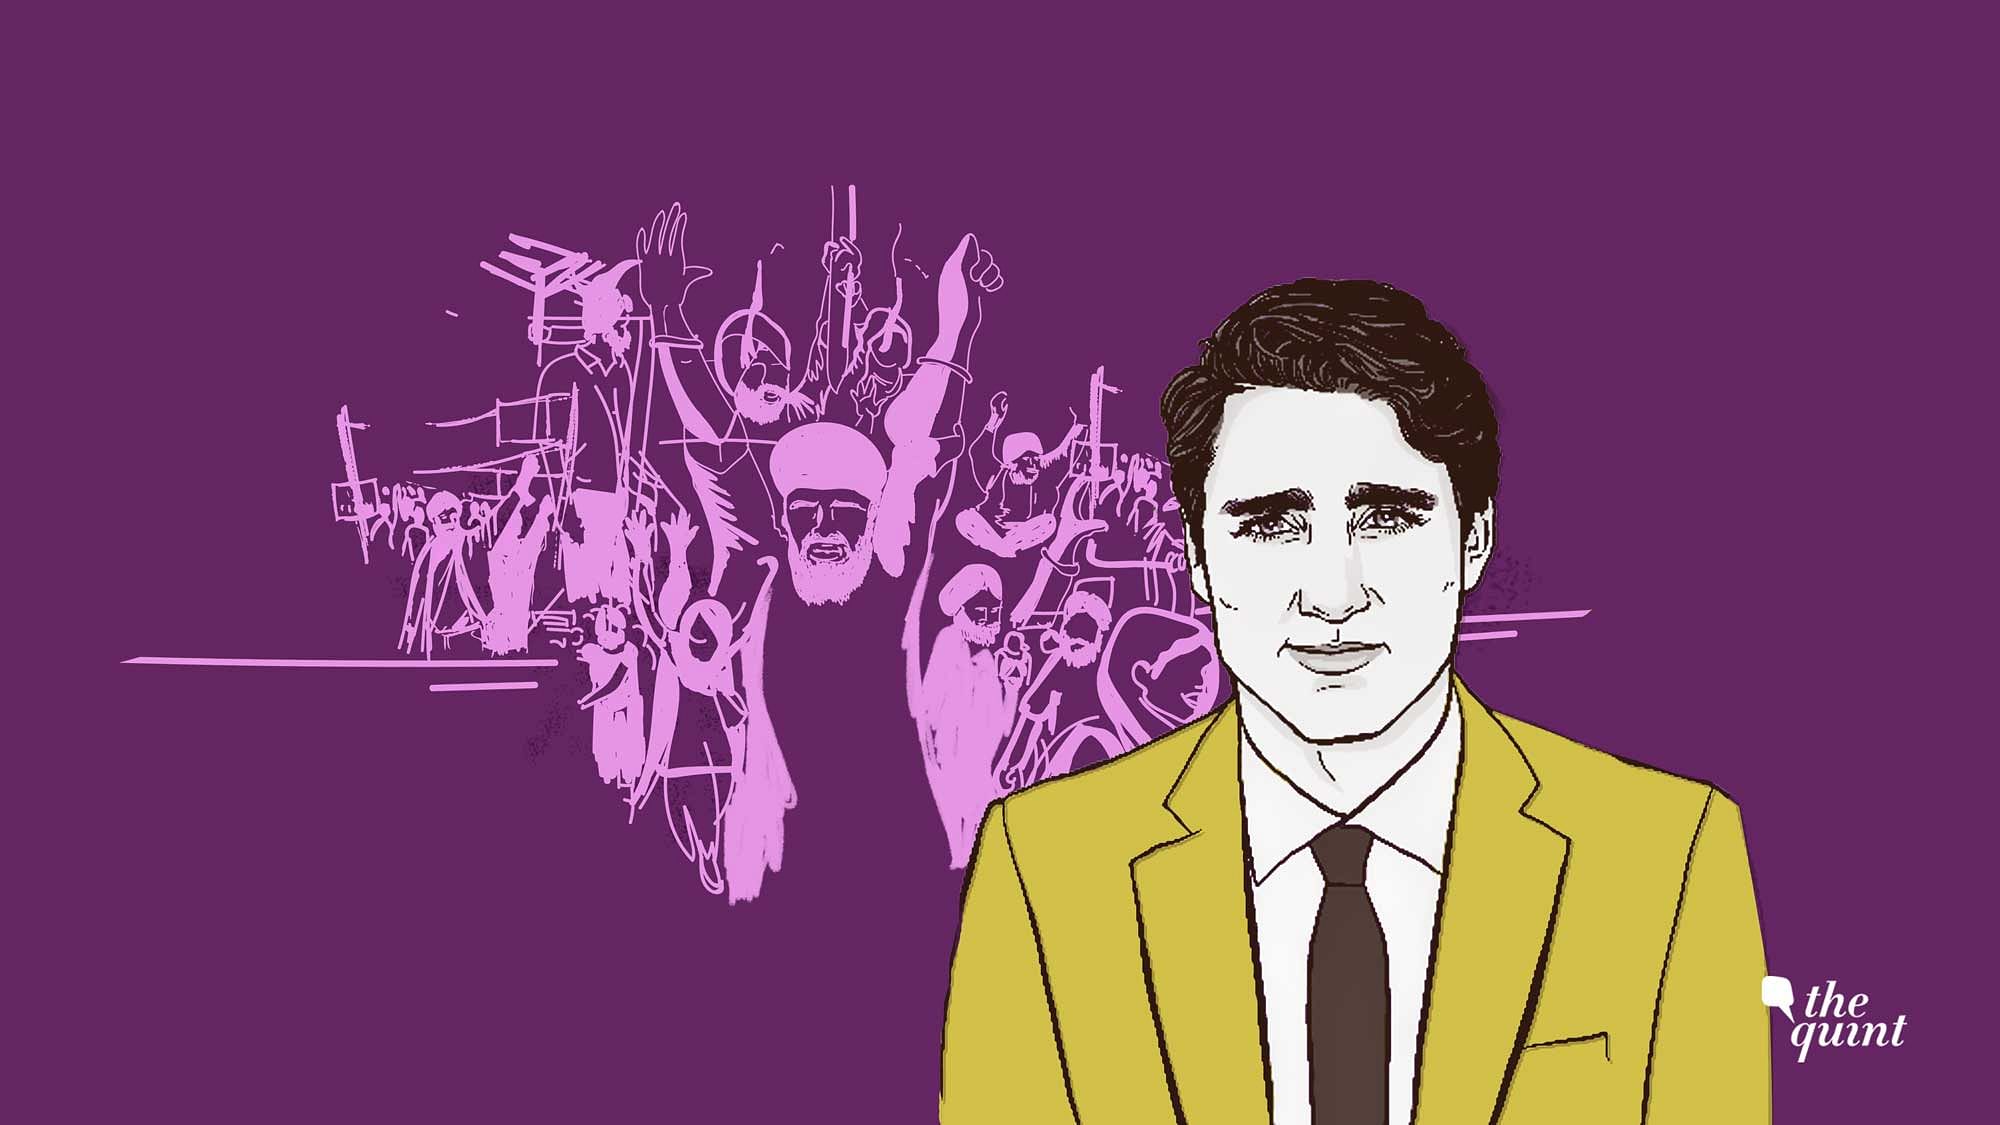 Image of Justin Trudeau against an artist’s impression of the Khalistan movement, used for representational purposes.